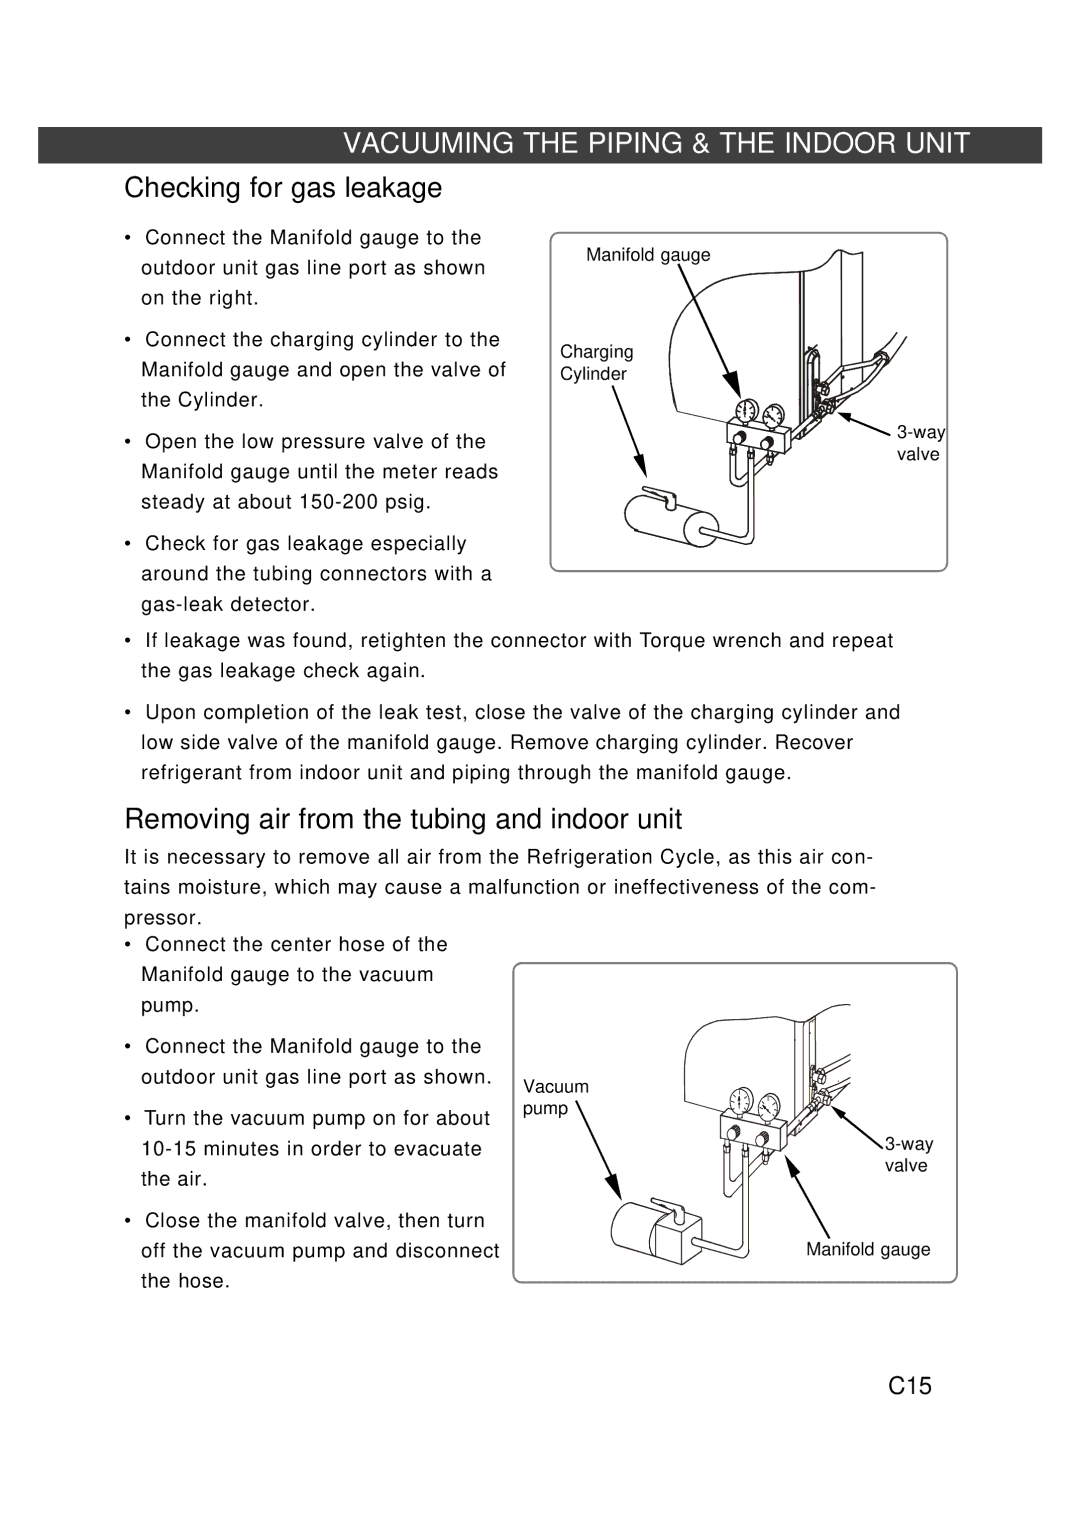 Fedders R407C service manual Checking for gas leakage, Removing air from the tubing and indoor unit 